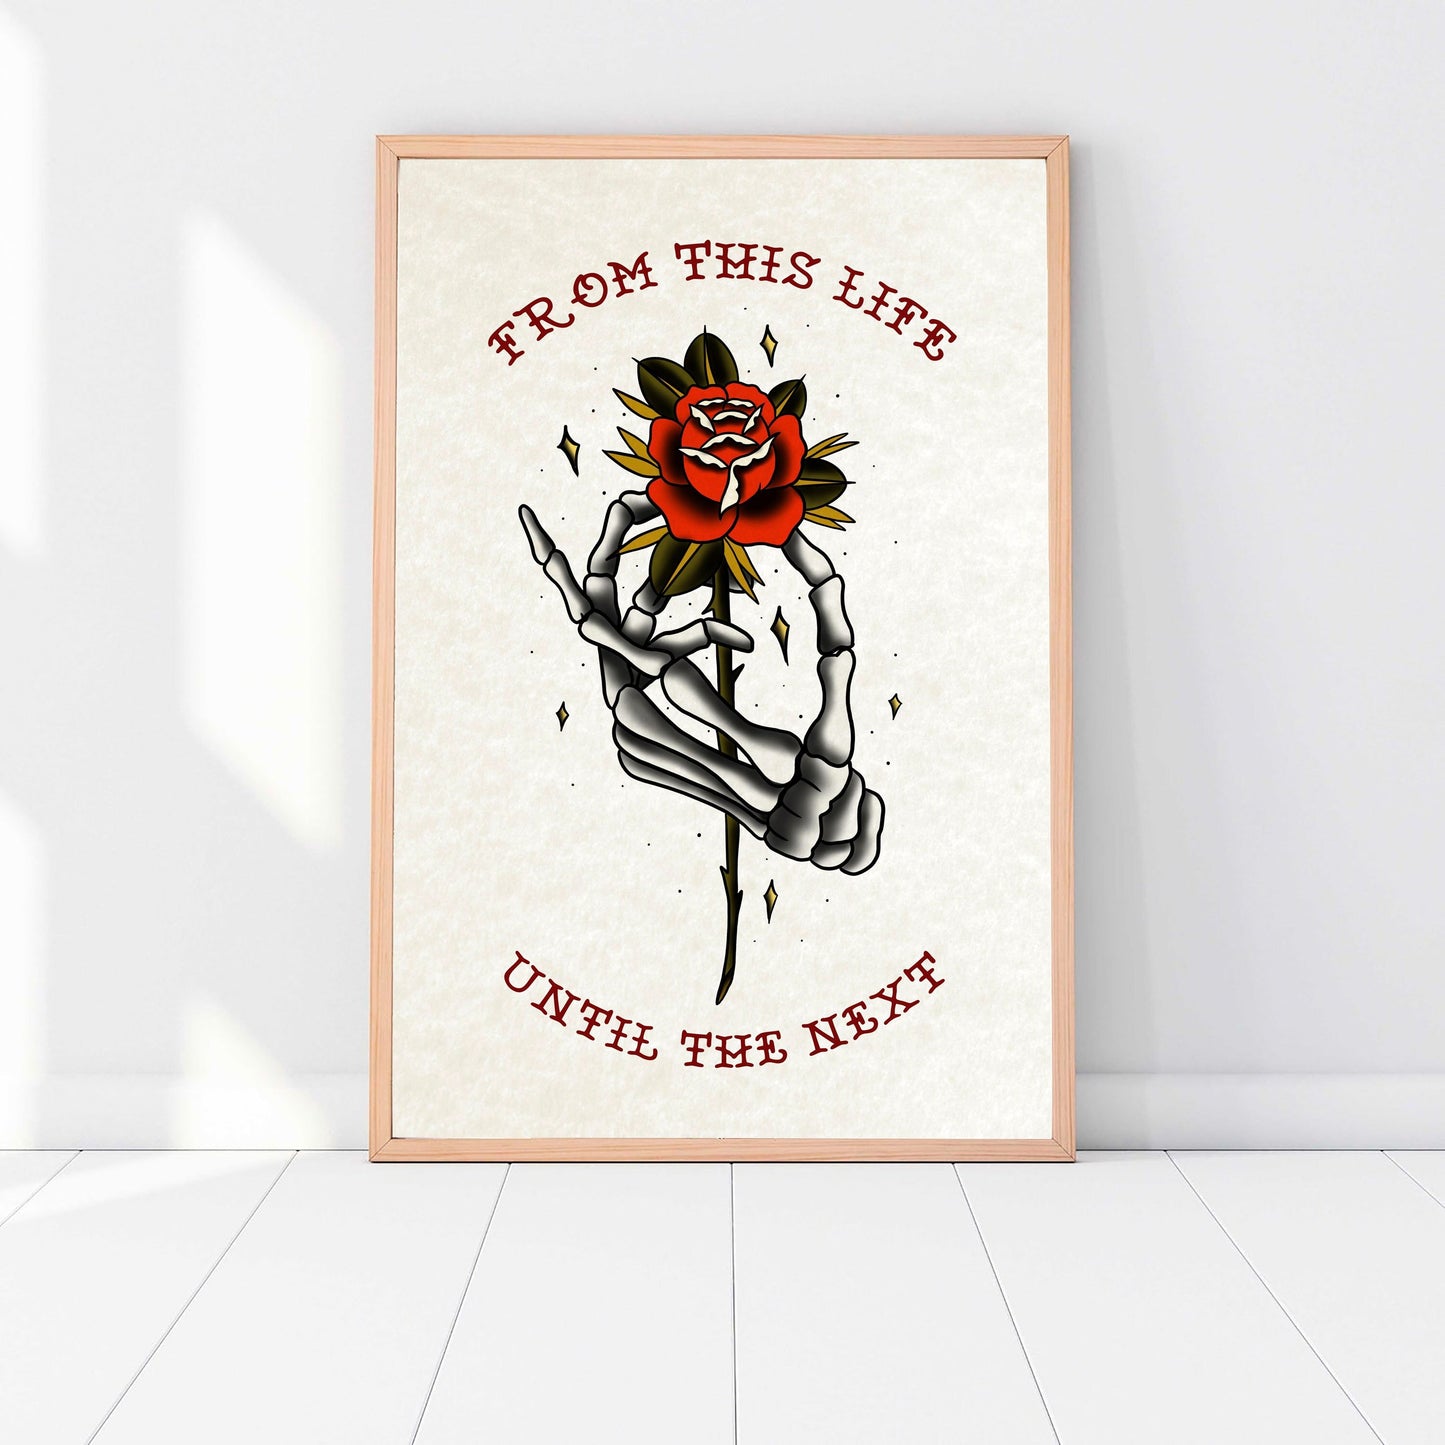 Tattoo Style Art Print - From This Life Until the Next